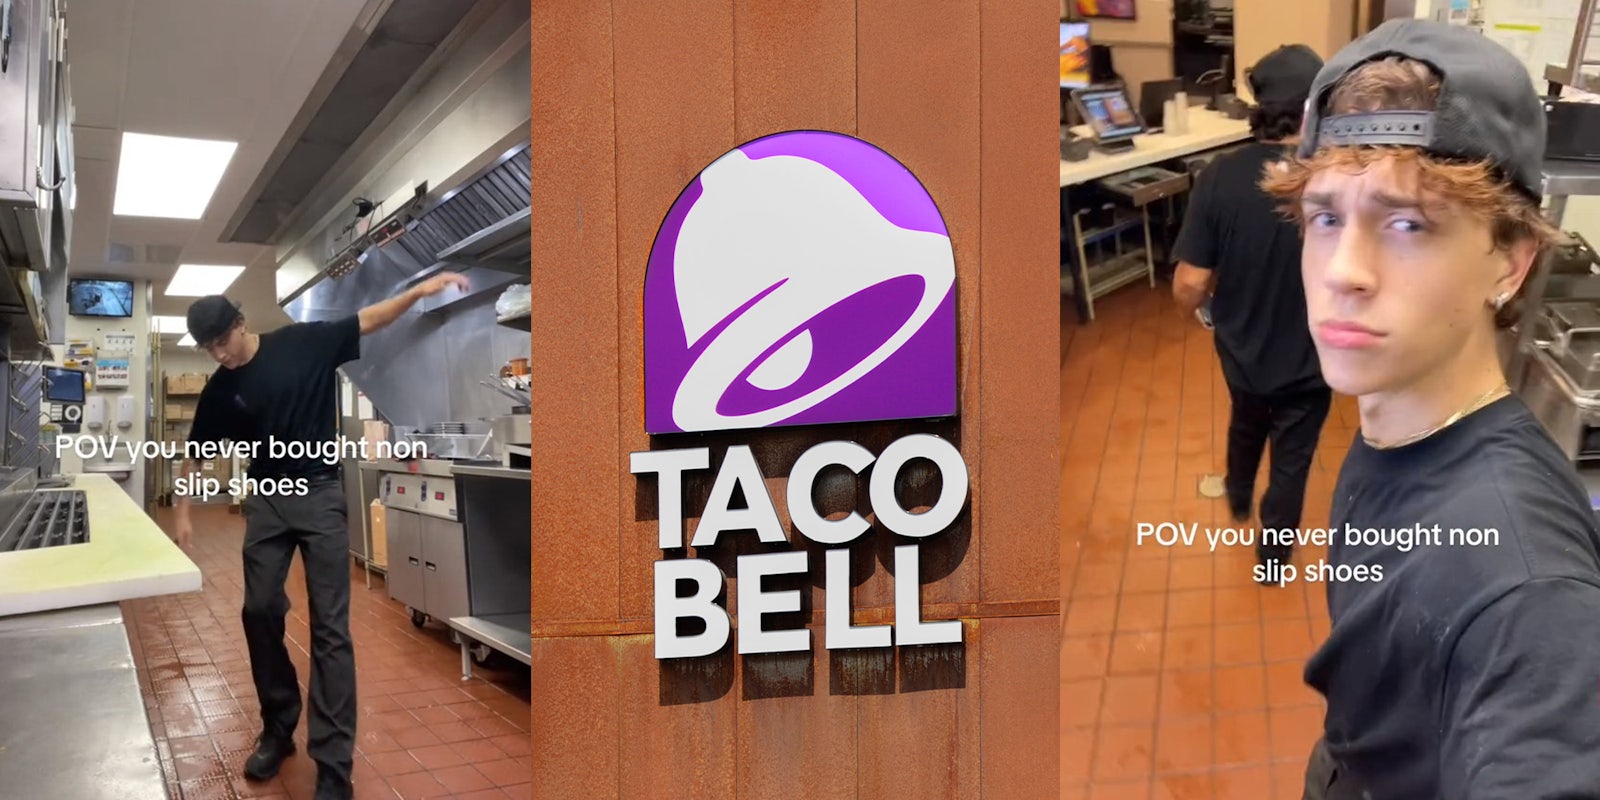 Taco Bell worker slips around store because he doesn't have non-slip shoes